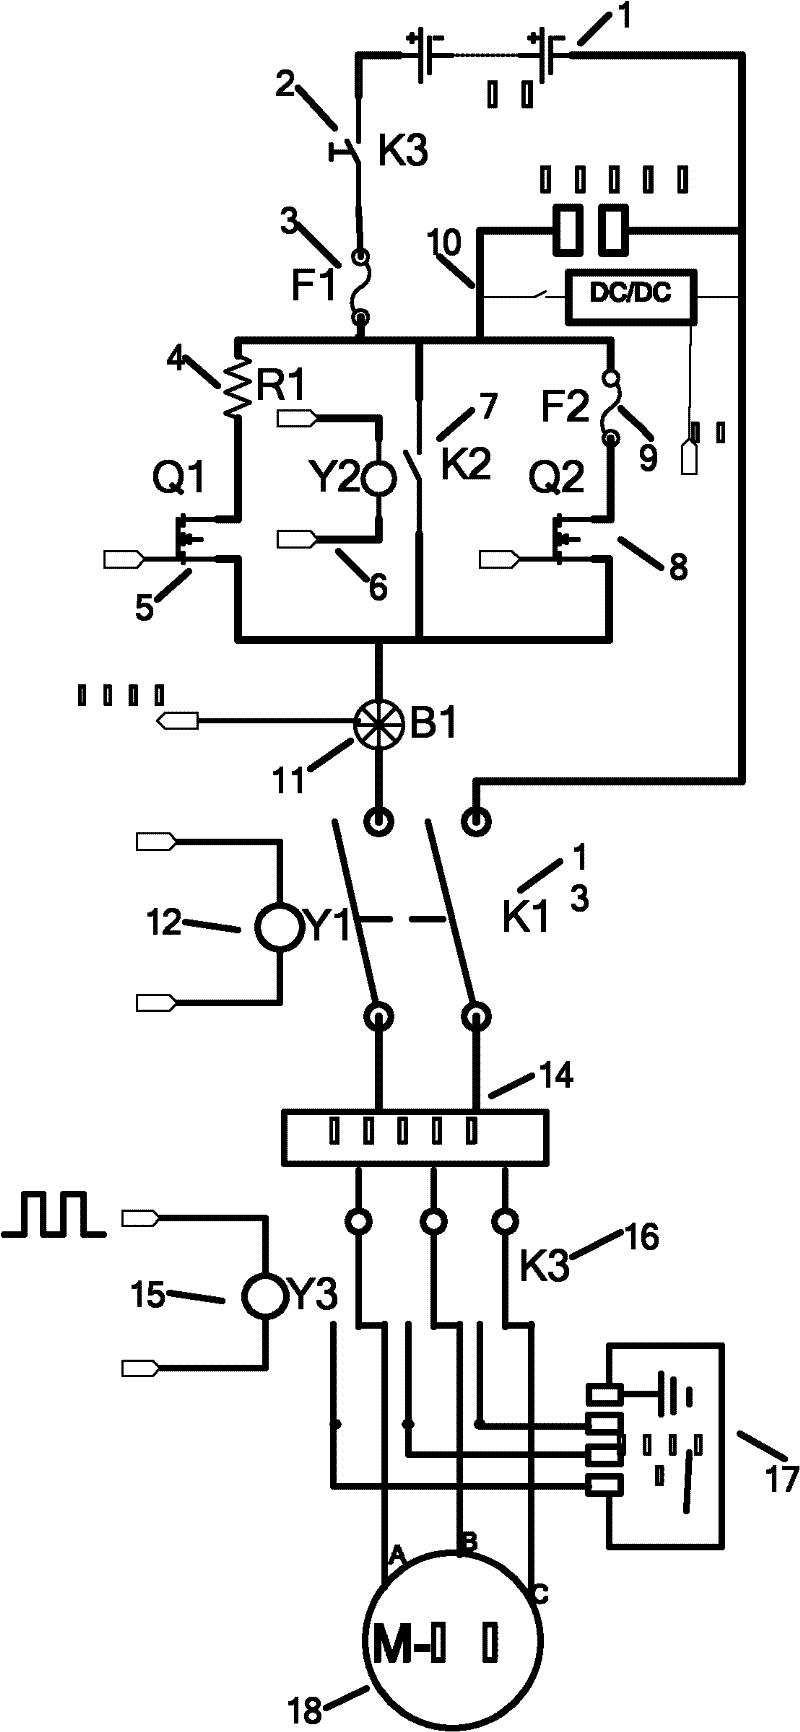 Structure of high-voltage electric control circuit for electric automobile